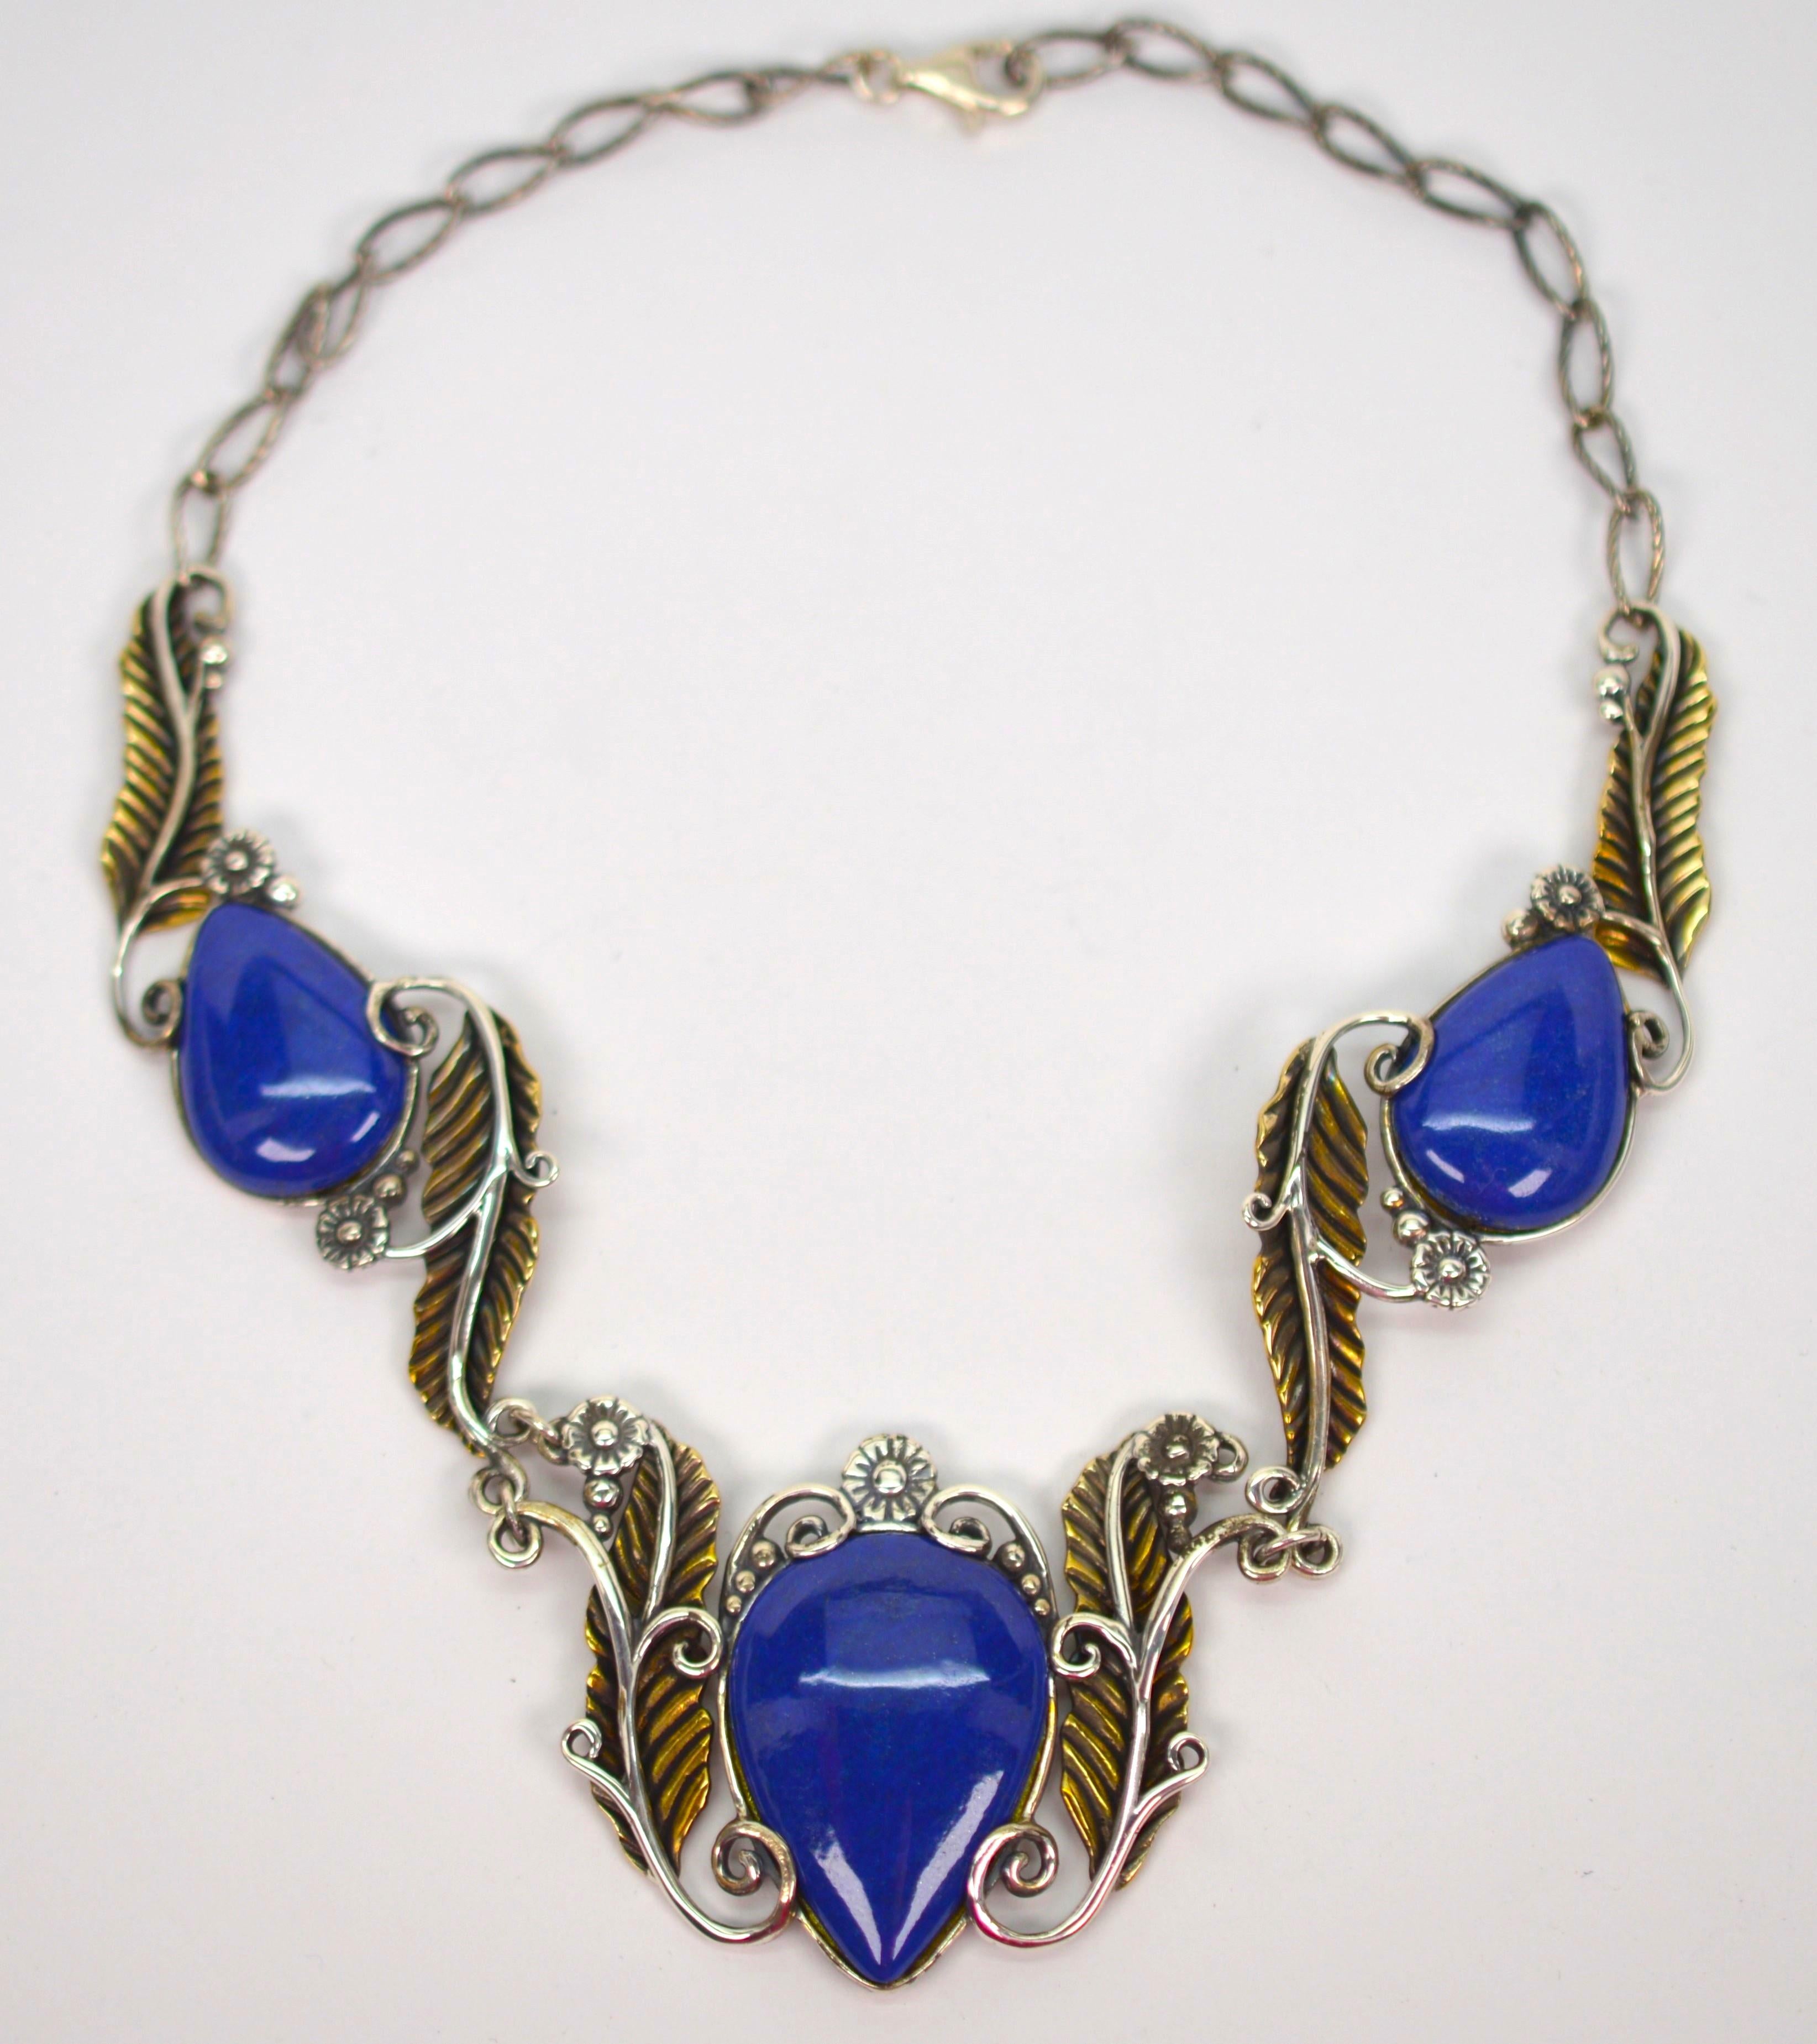 Deep blue pear-shaped Lapis cabochons bezel set in sterling silver display great color among the artful silver swirls and complimenting golden-toned brass leaves creating this Southwest inspired fashion necklace. From the American West Collection by